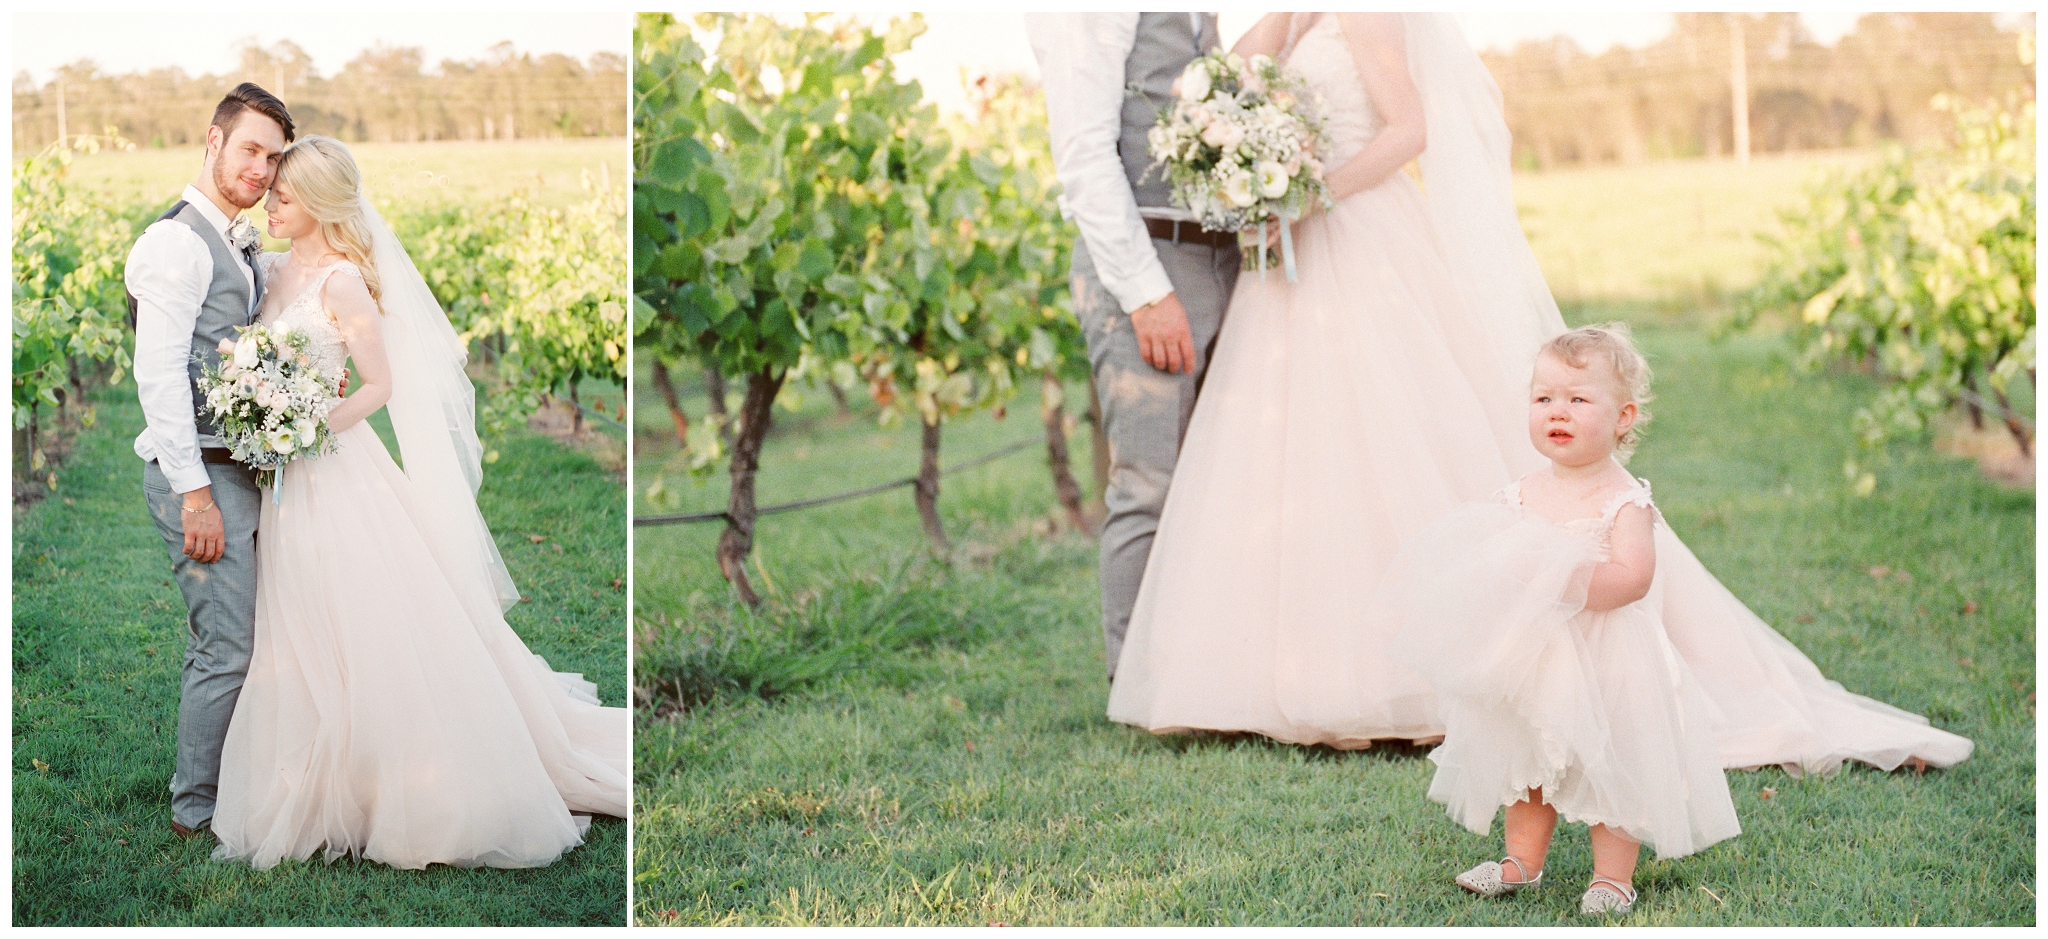 Tegan and Alex Wedding at Albert River Wines by Casey Jane Photography 63